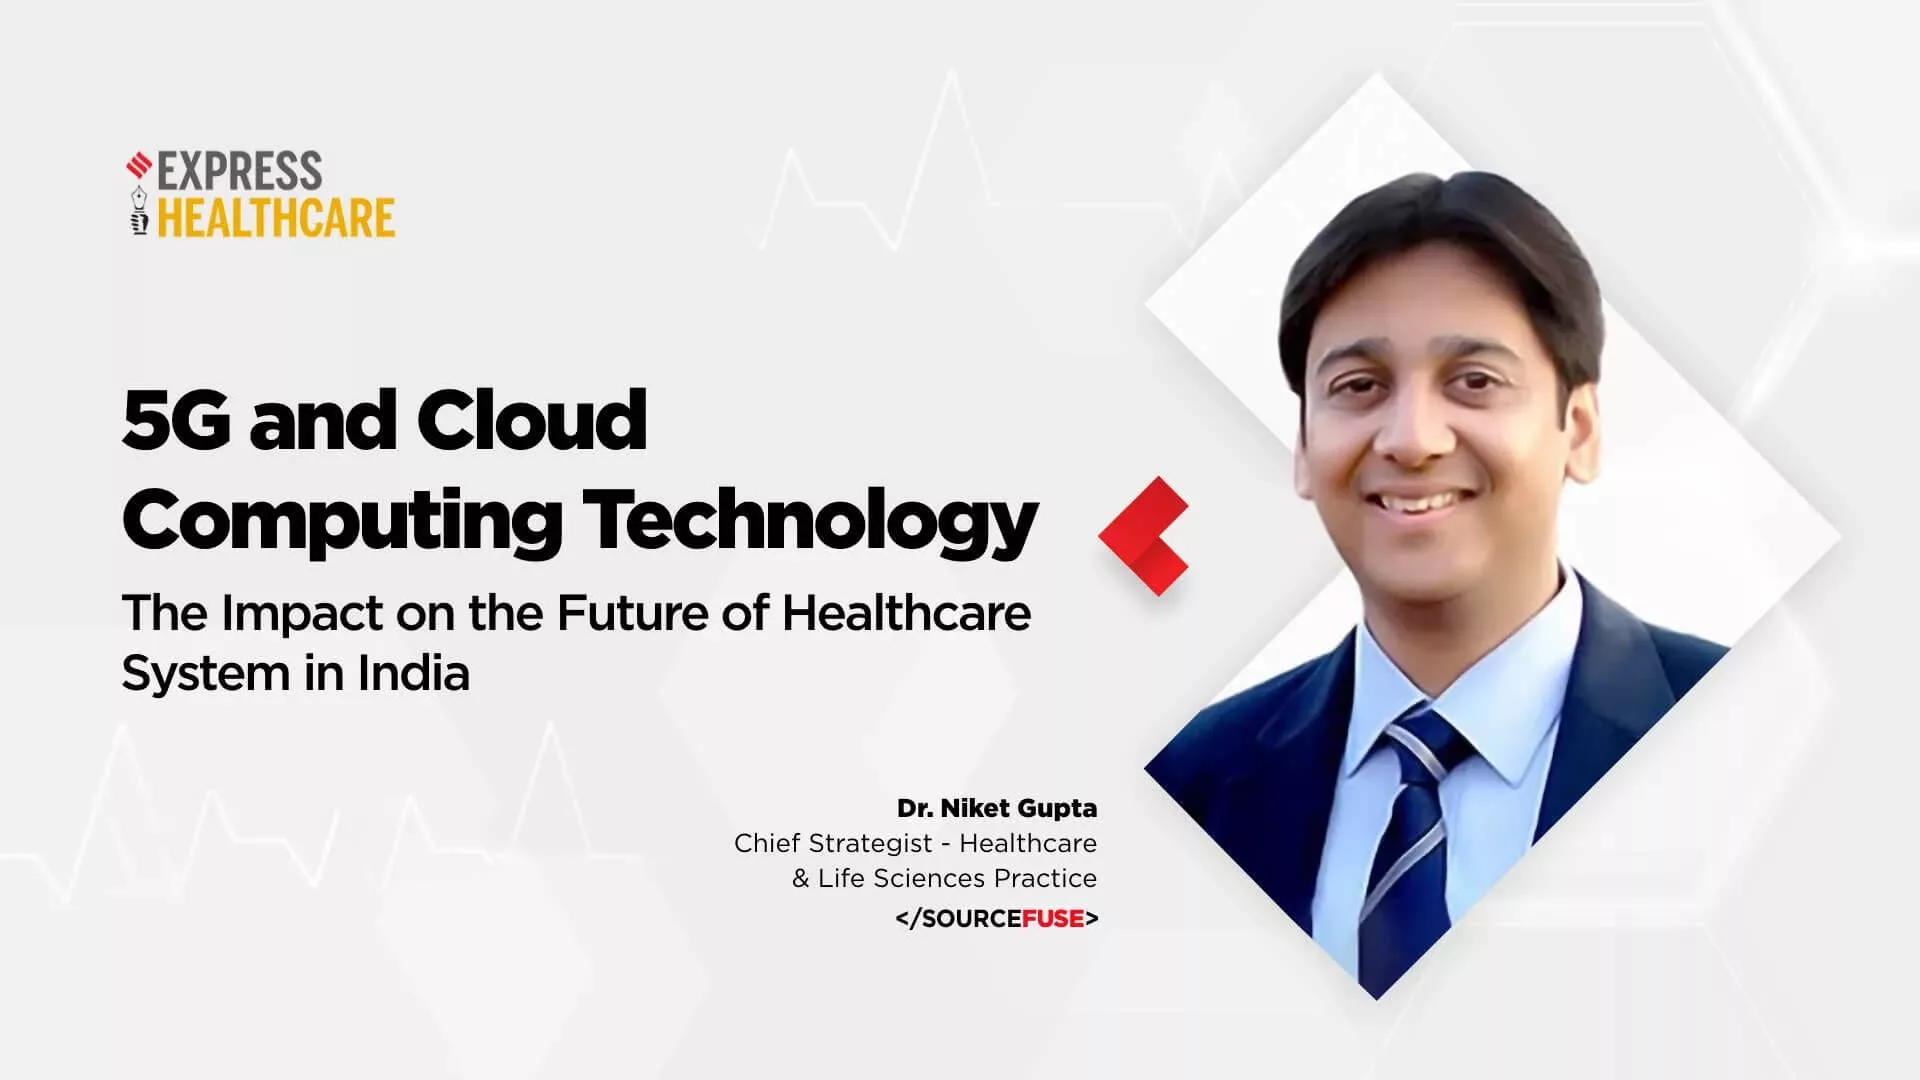 Discover the Impact of 5G & Cloud Computing Technology on Healthcare Ecosystem